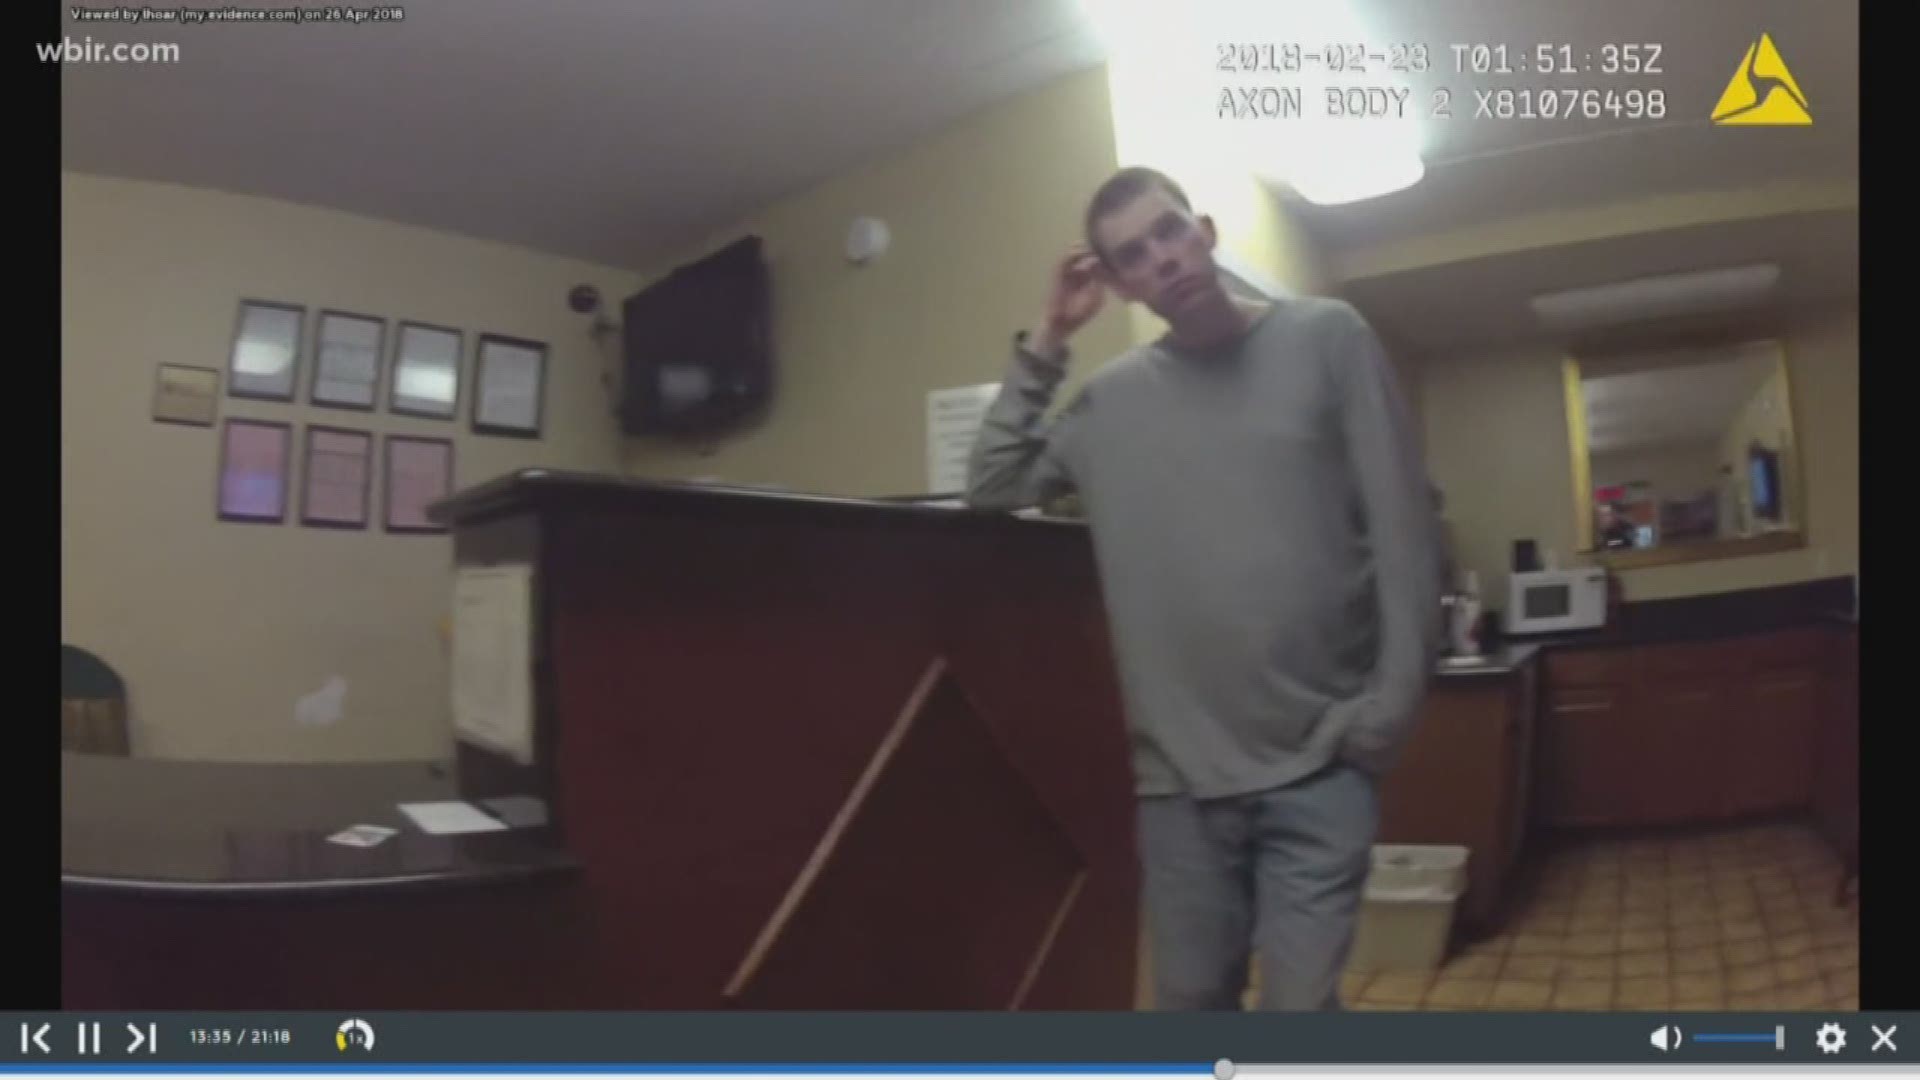 April 26, 2018: Alcoa Police body camera video shows the man accused of killing four people at a Middle Tennessee Waffle House describing an argument he got into with a woman an Alcoa motel in February 2018.